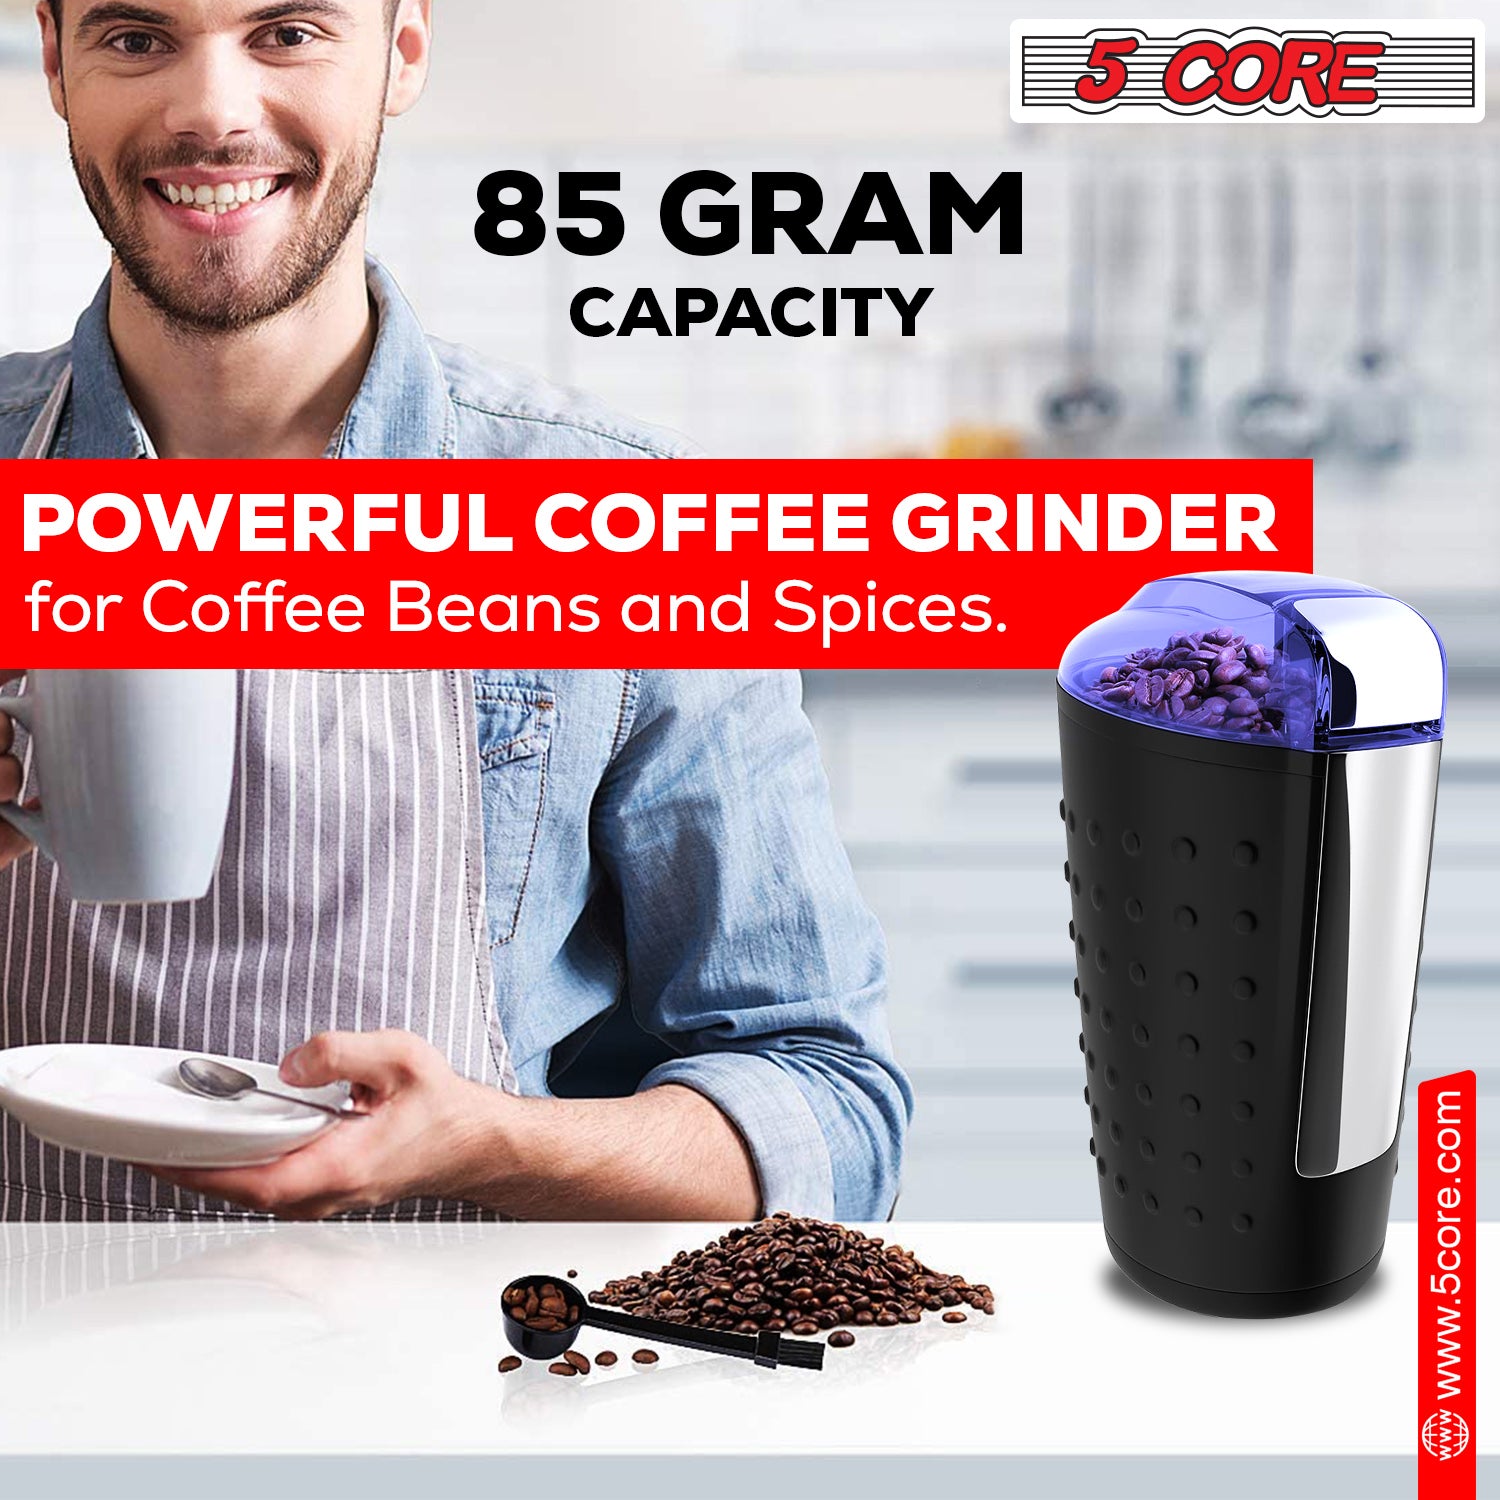 Experience the aroma and flavor of freshly ground coffee with 5 Core.